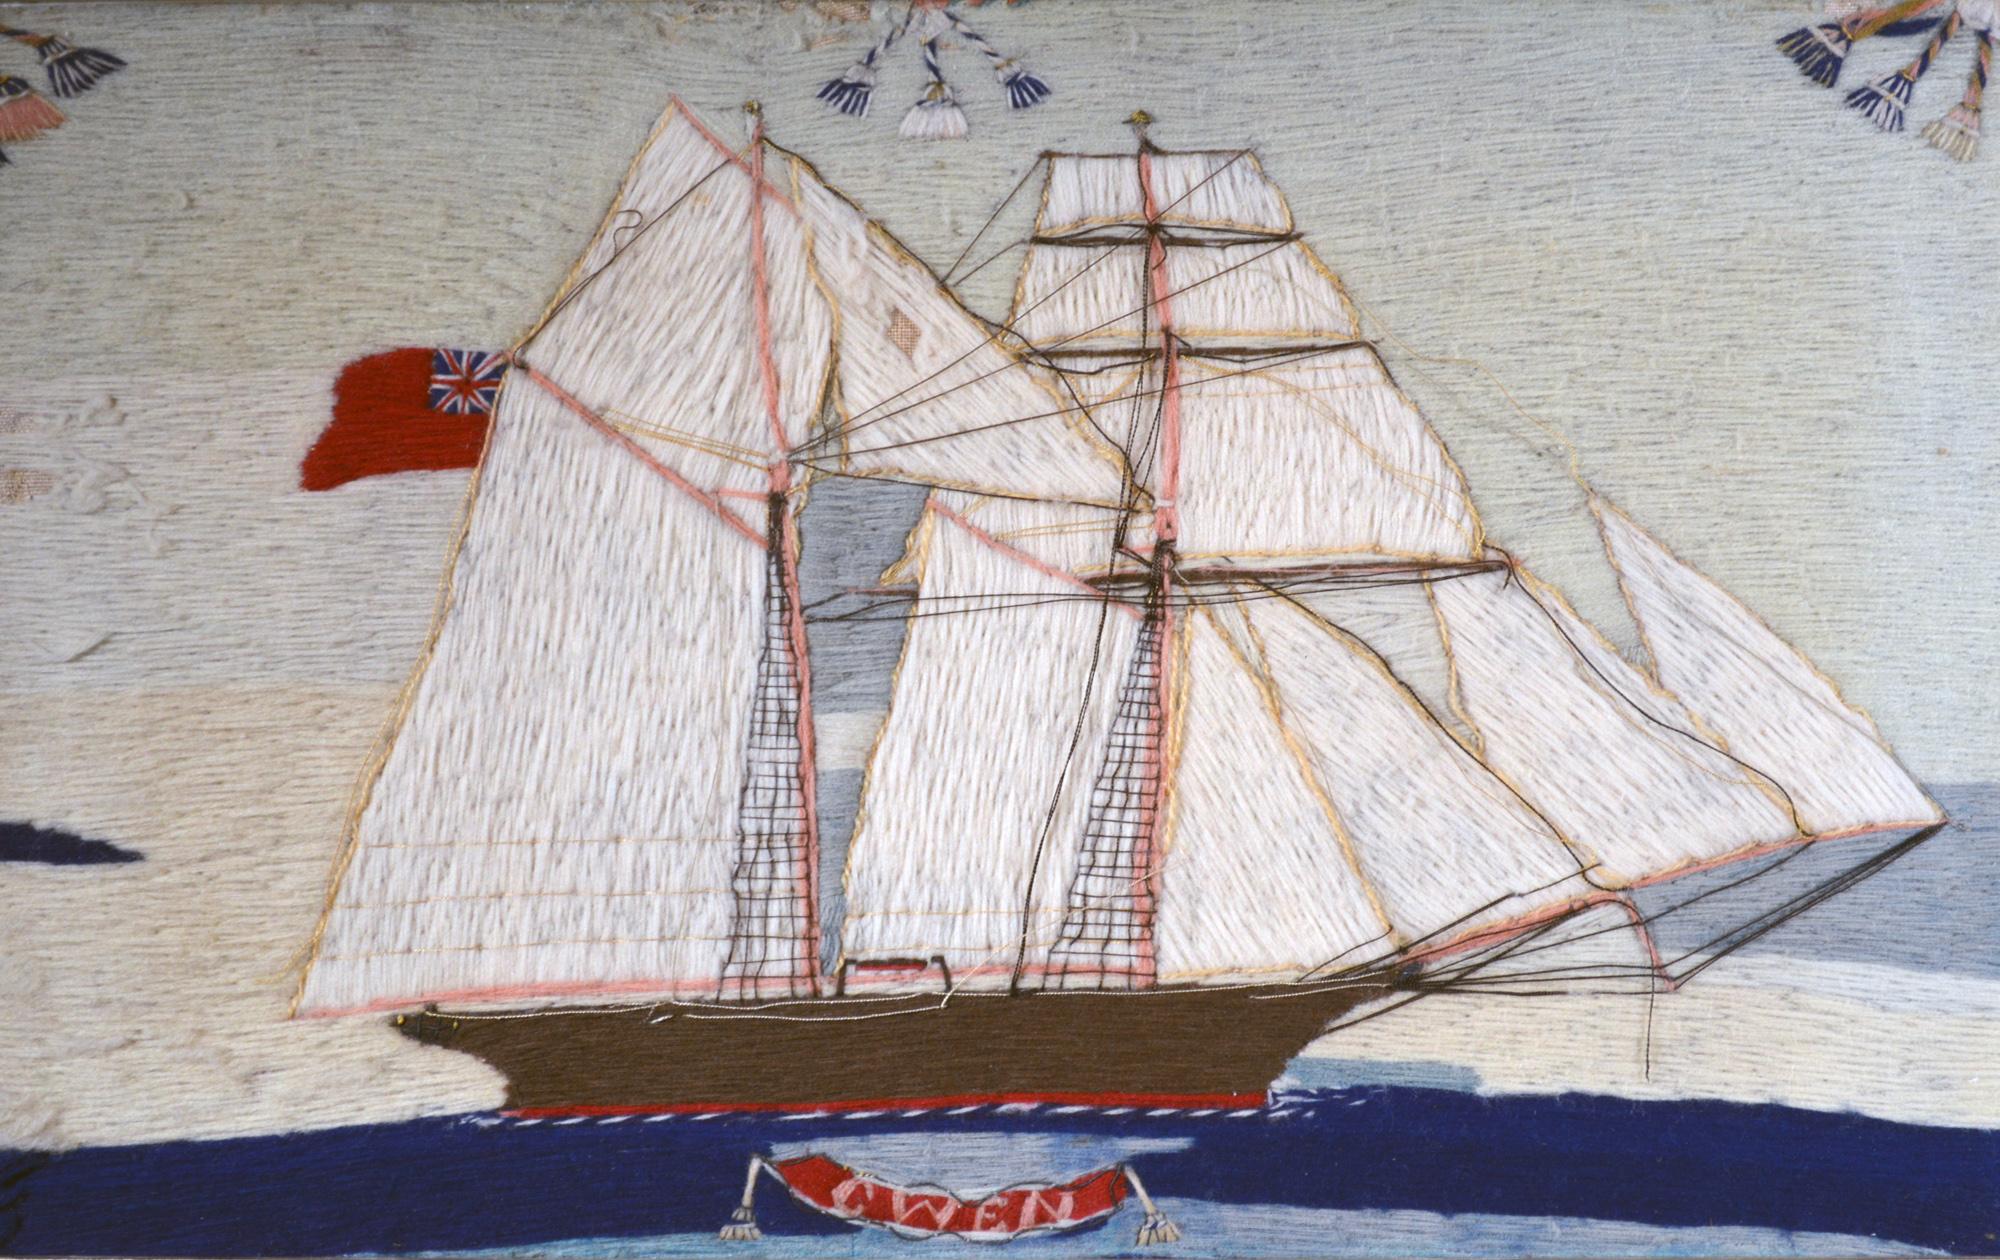 British Sailor's Woolwork or Woolie,
The Gwen,
Circa 1875

The small British sailor's woolie depicts a starboard view of the brigantine Gwen sailing on a calm blue sea and flying a red ensign. The ship is named on a red banner below with a sewn